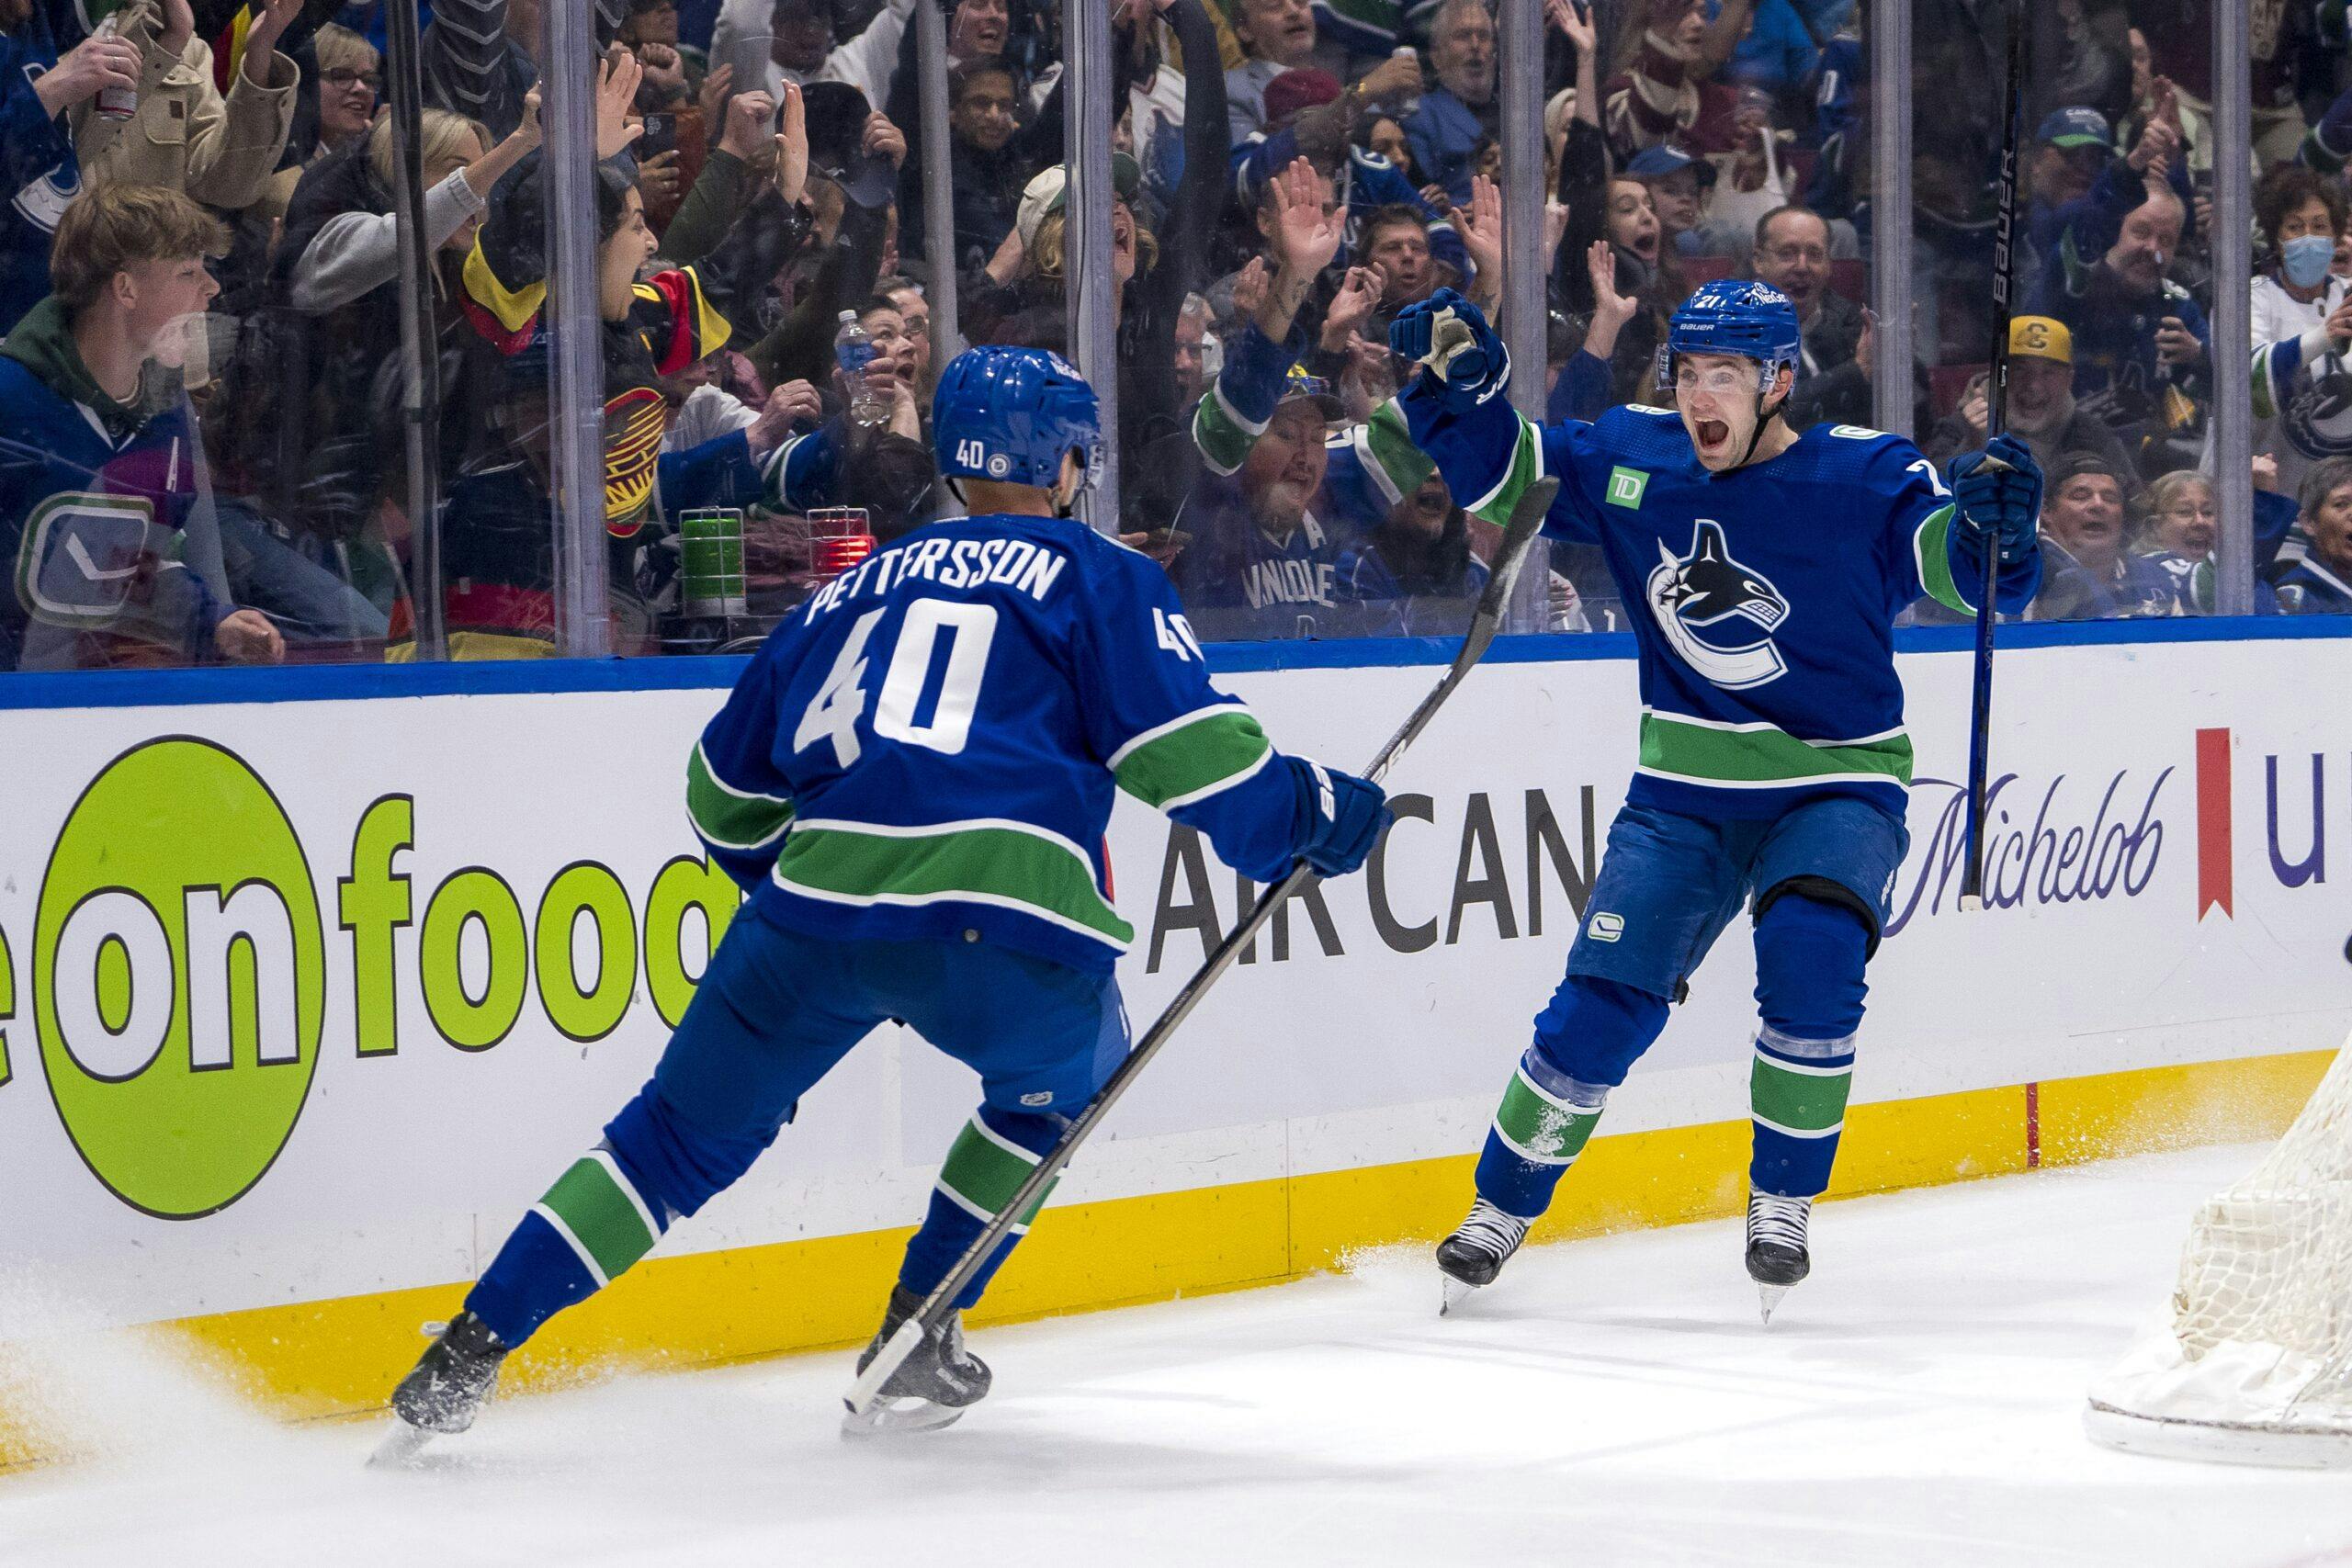 Vancouver Canucks clinch Pacific Division title with 4-1 win over the Calgary Flames